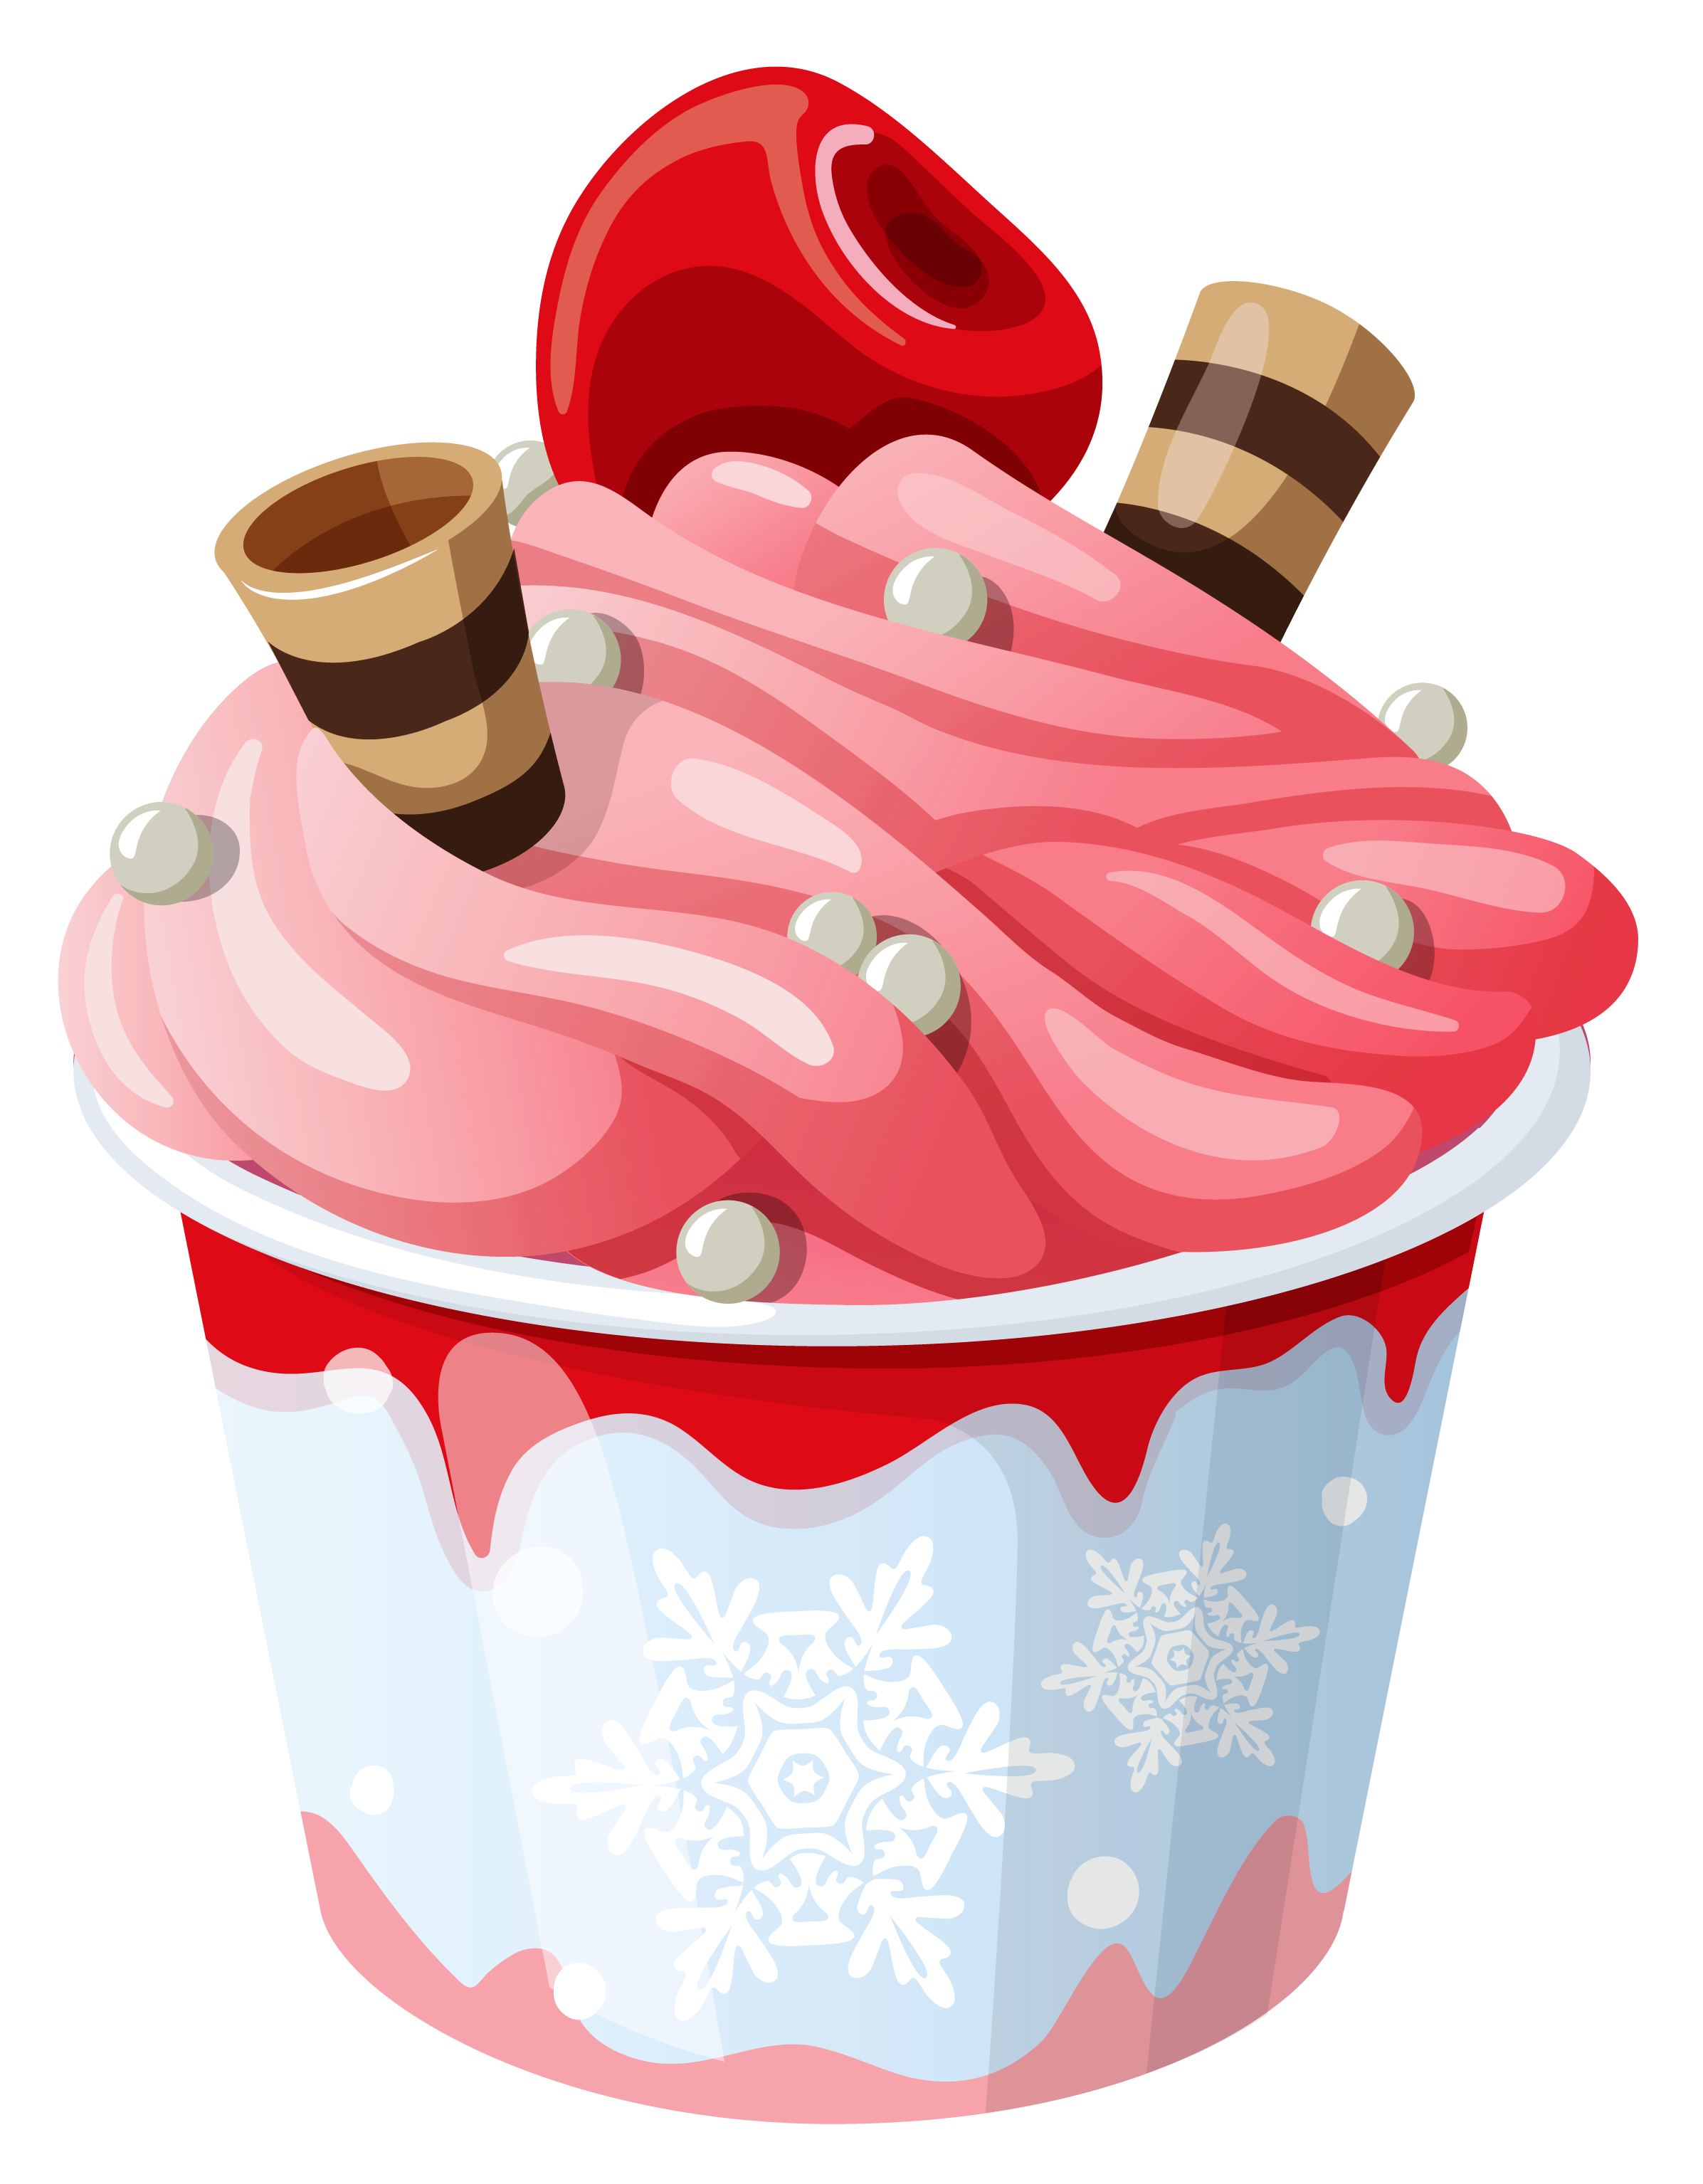 Ice cream cup png. Desserts clipart healthy dessert